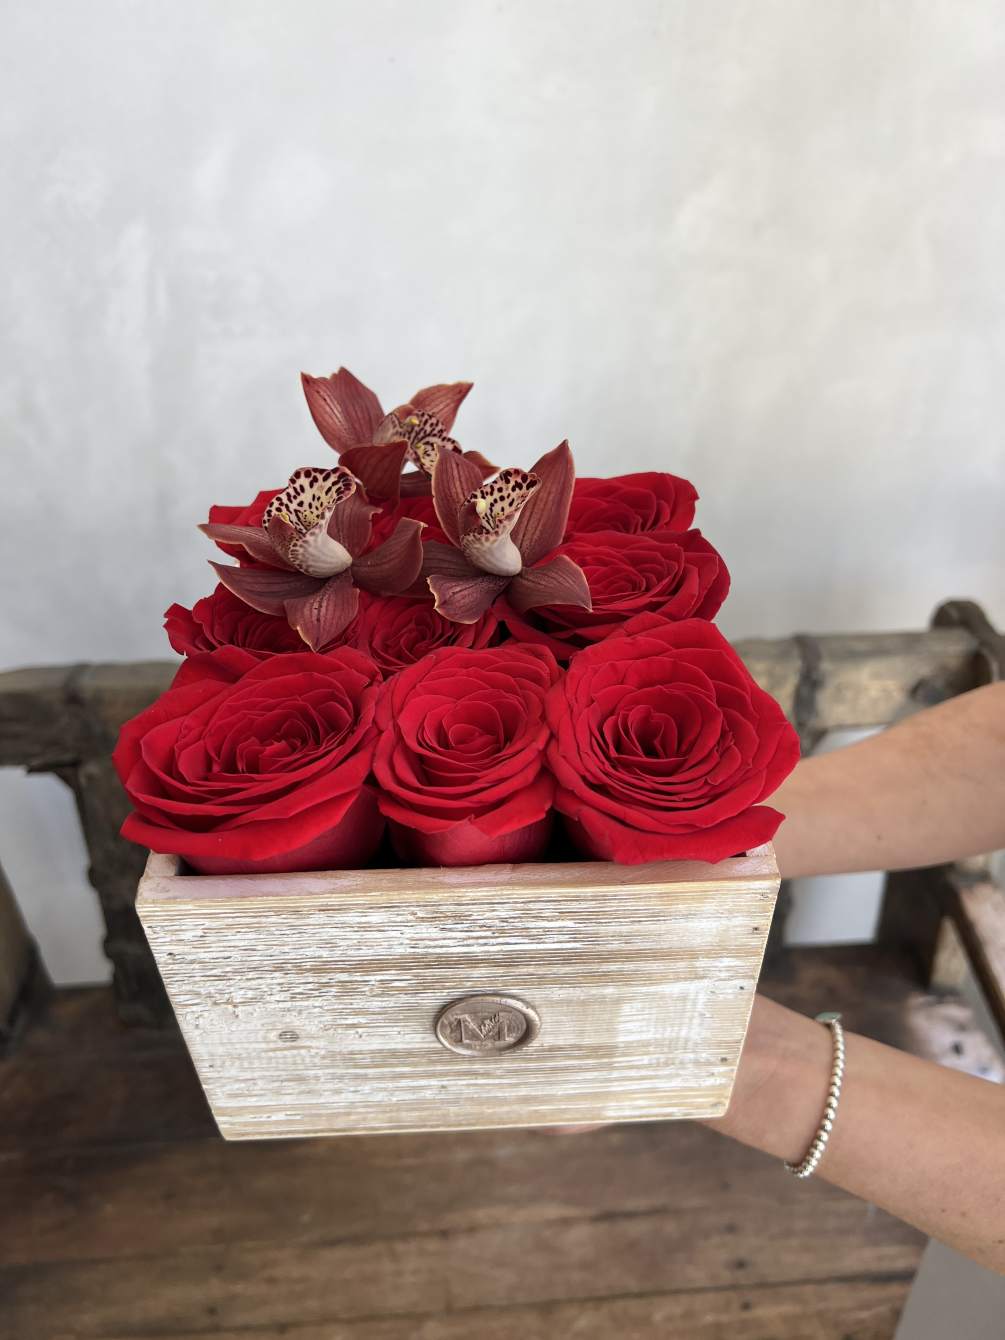 This luxurious arrangement showcases the timeless allure of red roses and the